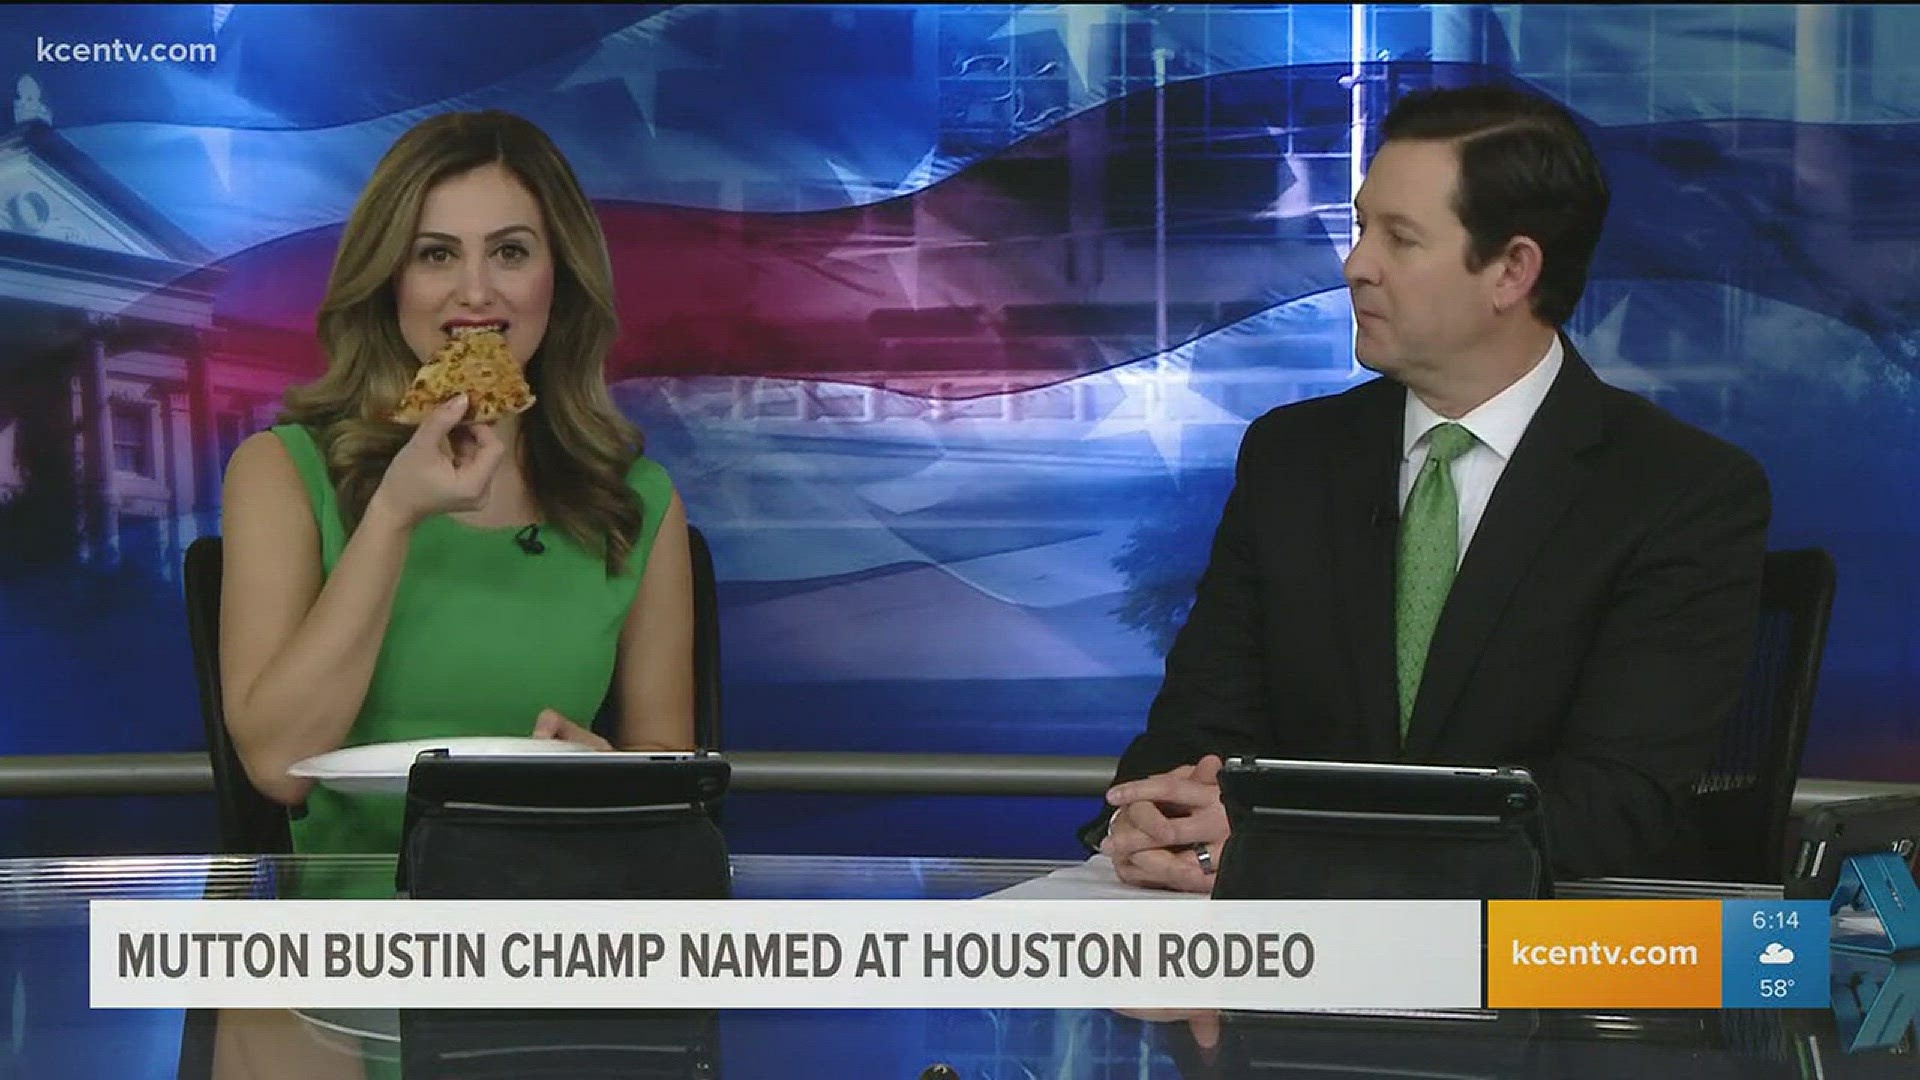 Heidi eats pizza during the show